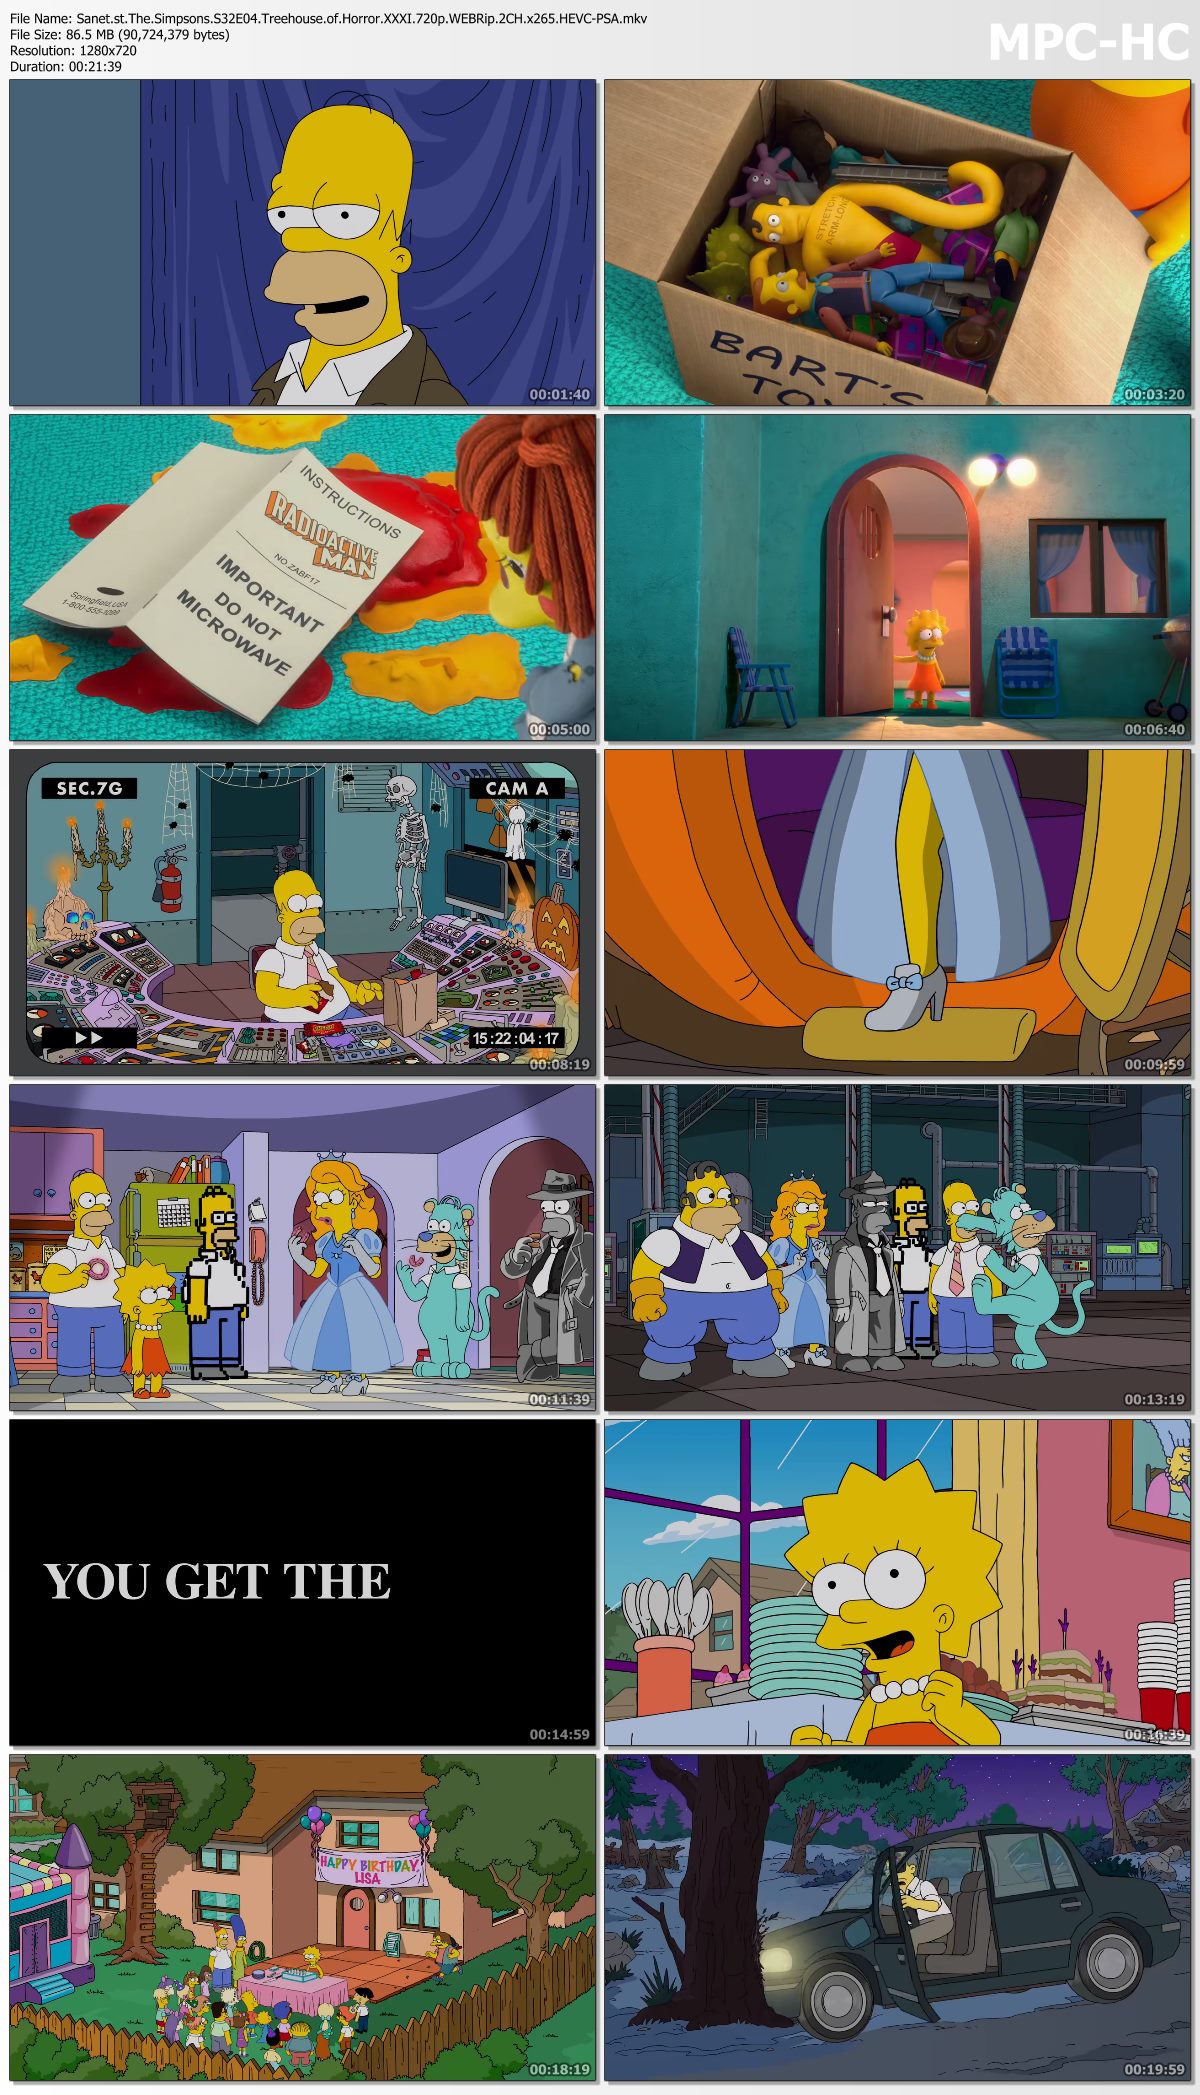 Download The Simpsons S32E04 Treehouse of Horror XXXI 720p WEBRip 2CH